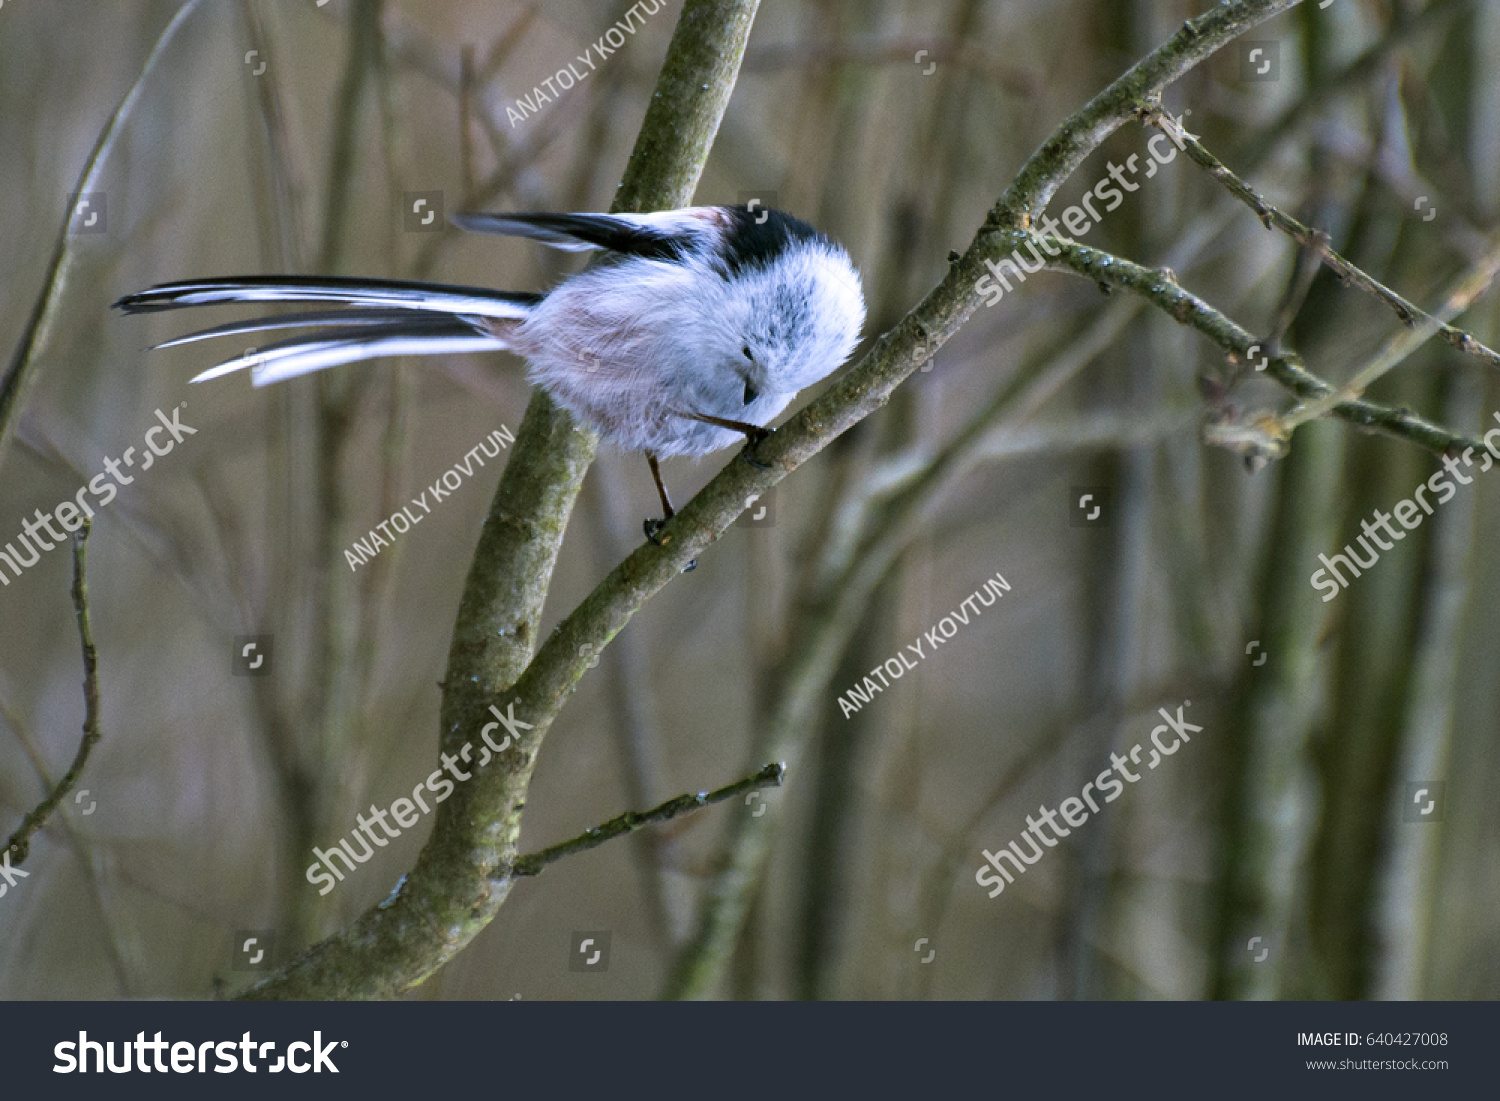 A small bird with a long-tailed tit sits on a branch and bends its head #640427008